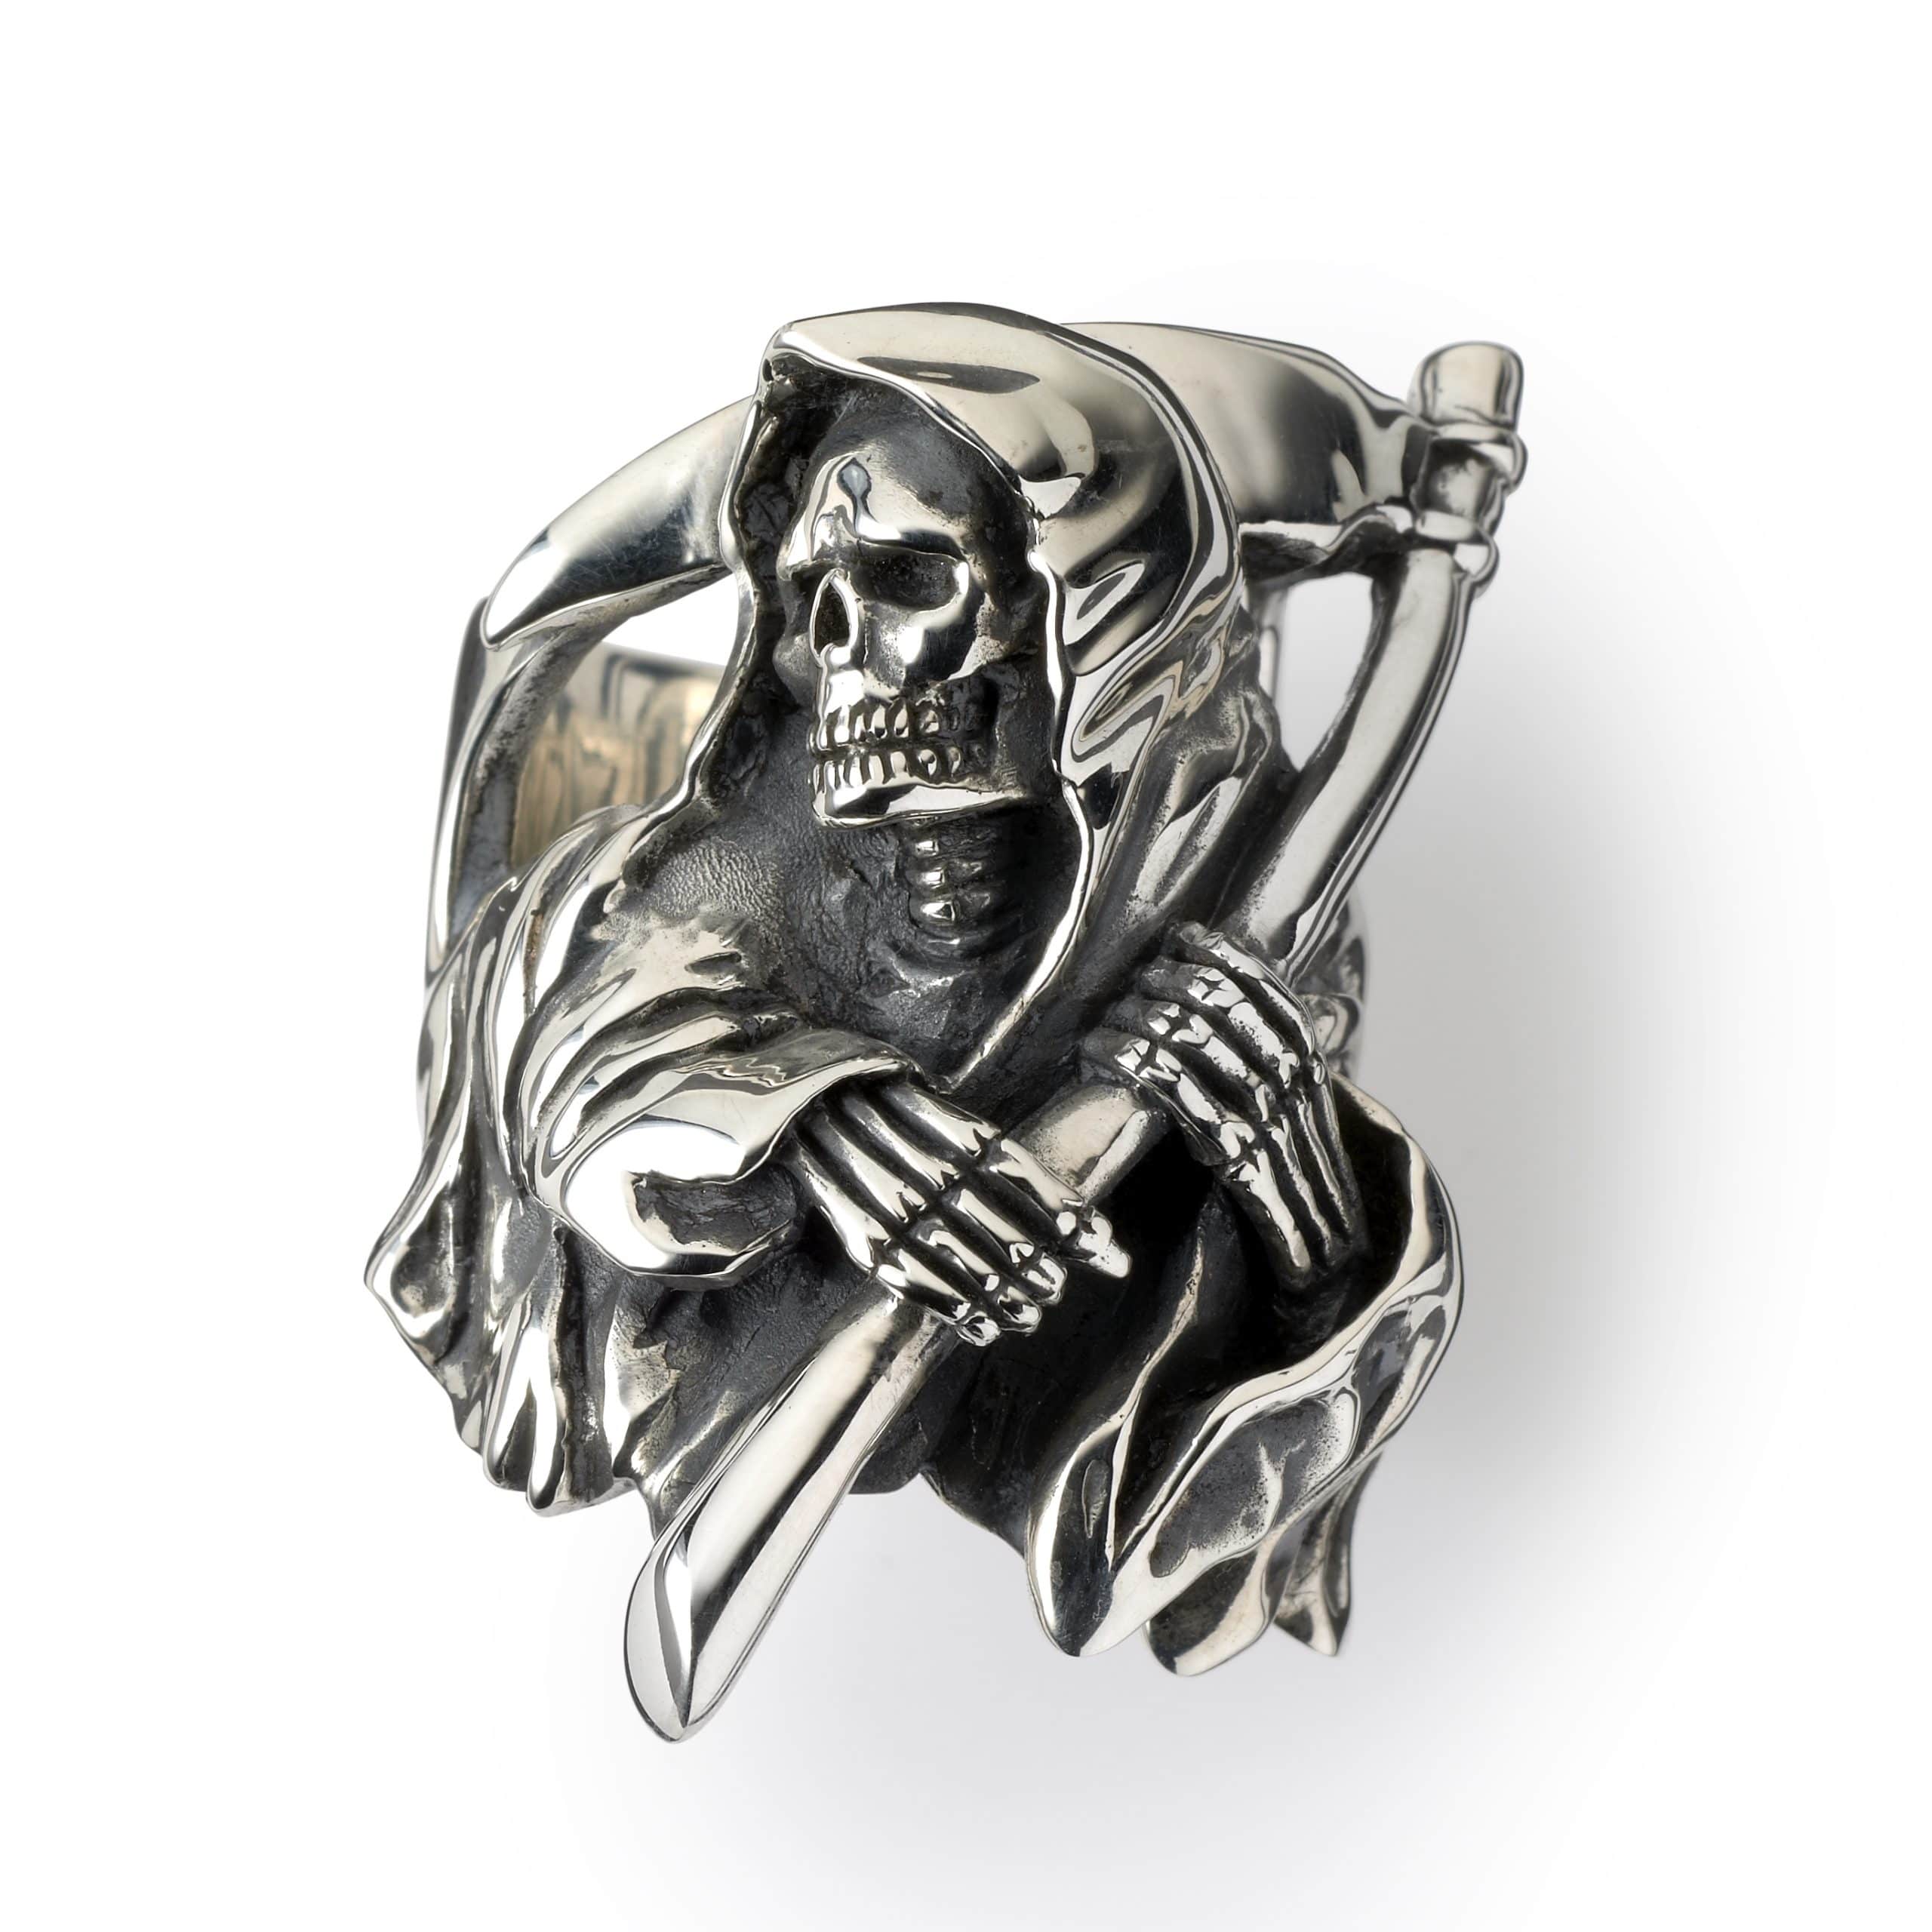 Wes Lang 'Reaper' Ring - The Great Frog London - USA